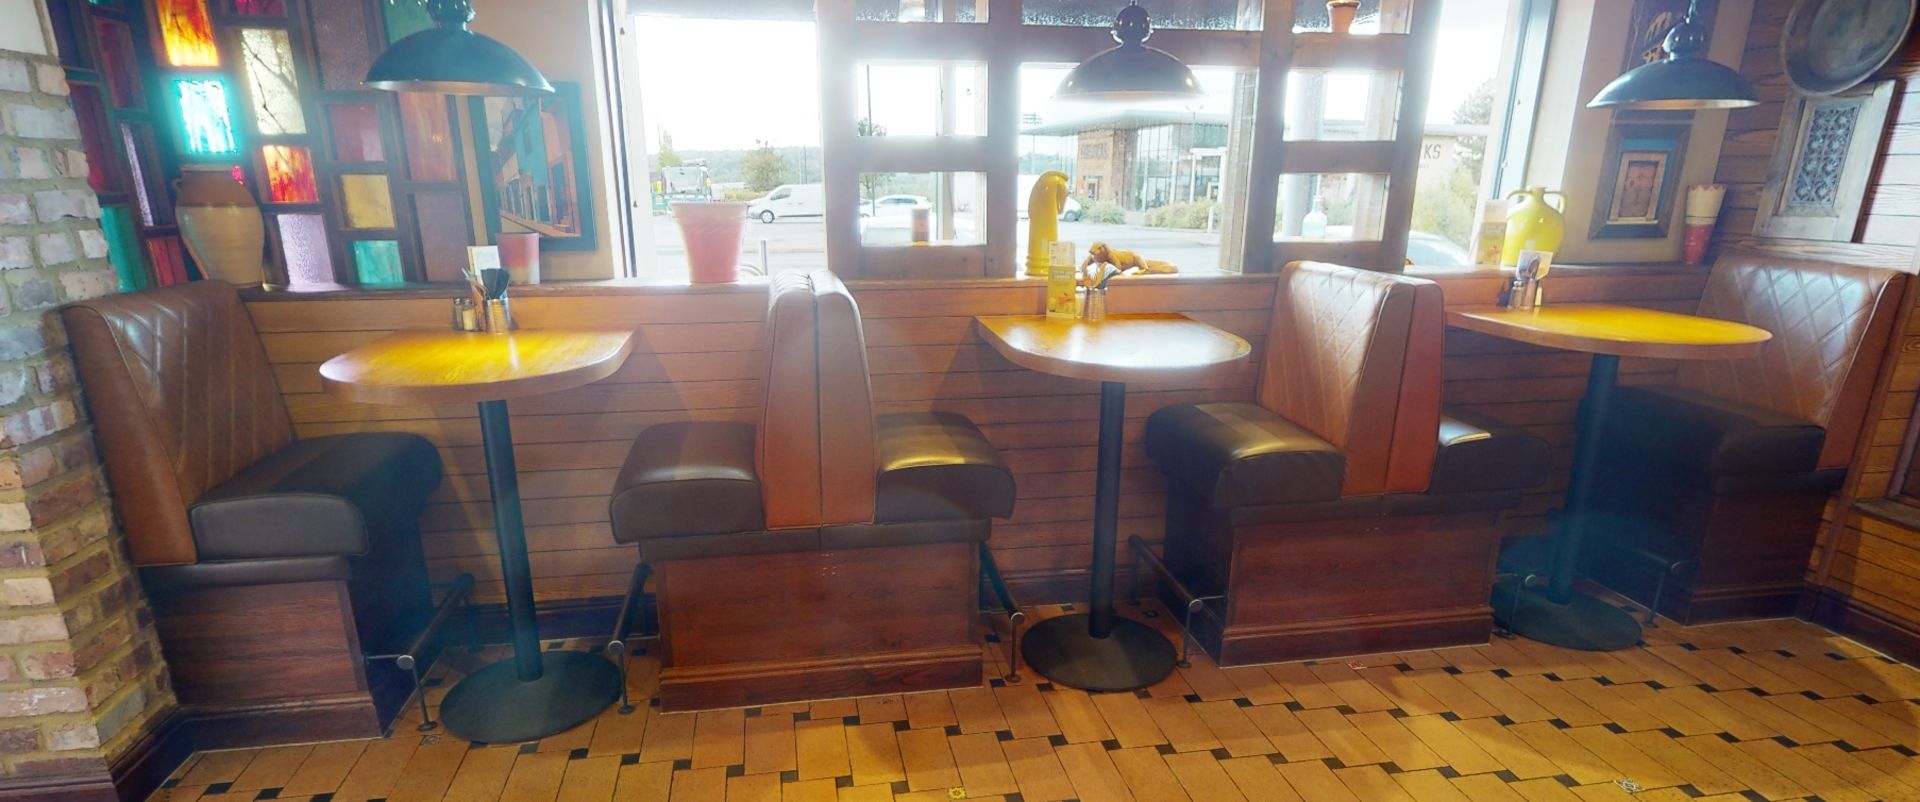 1 x Collection of Restaurant High Single Seat Seating Benches With Footrests - Includes 2 x End - Image 15 of 16